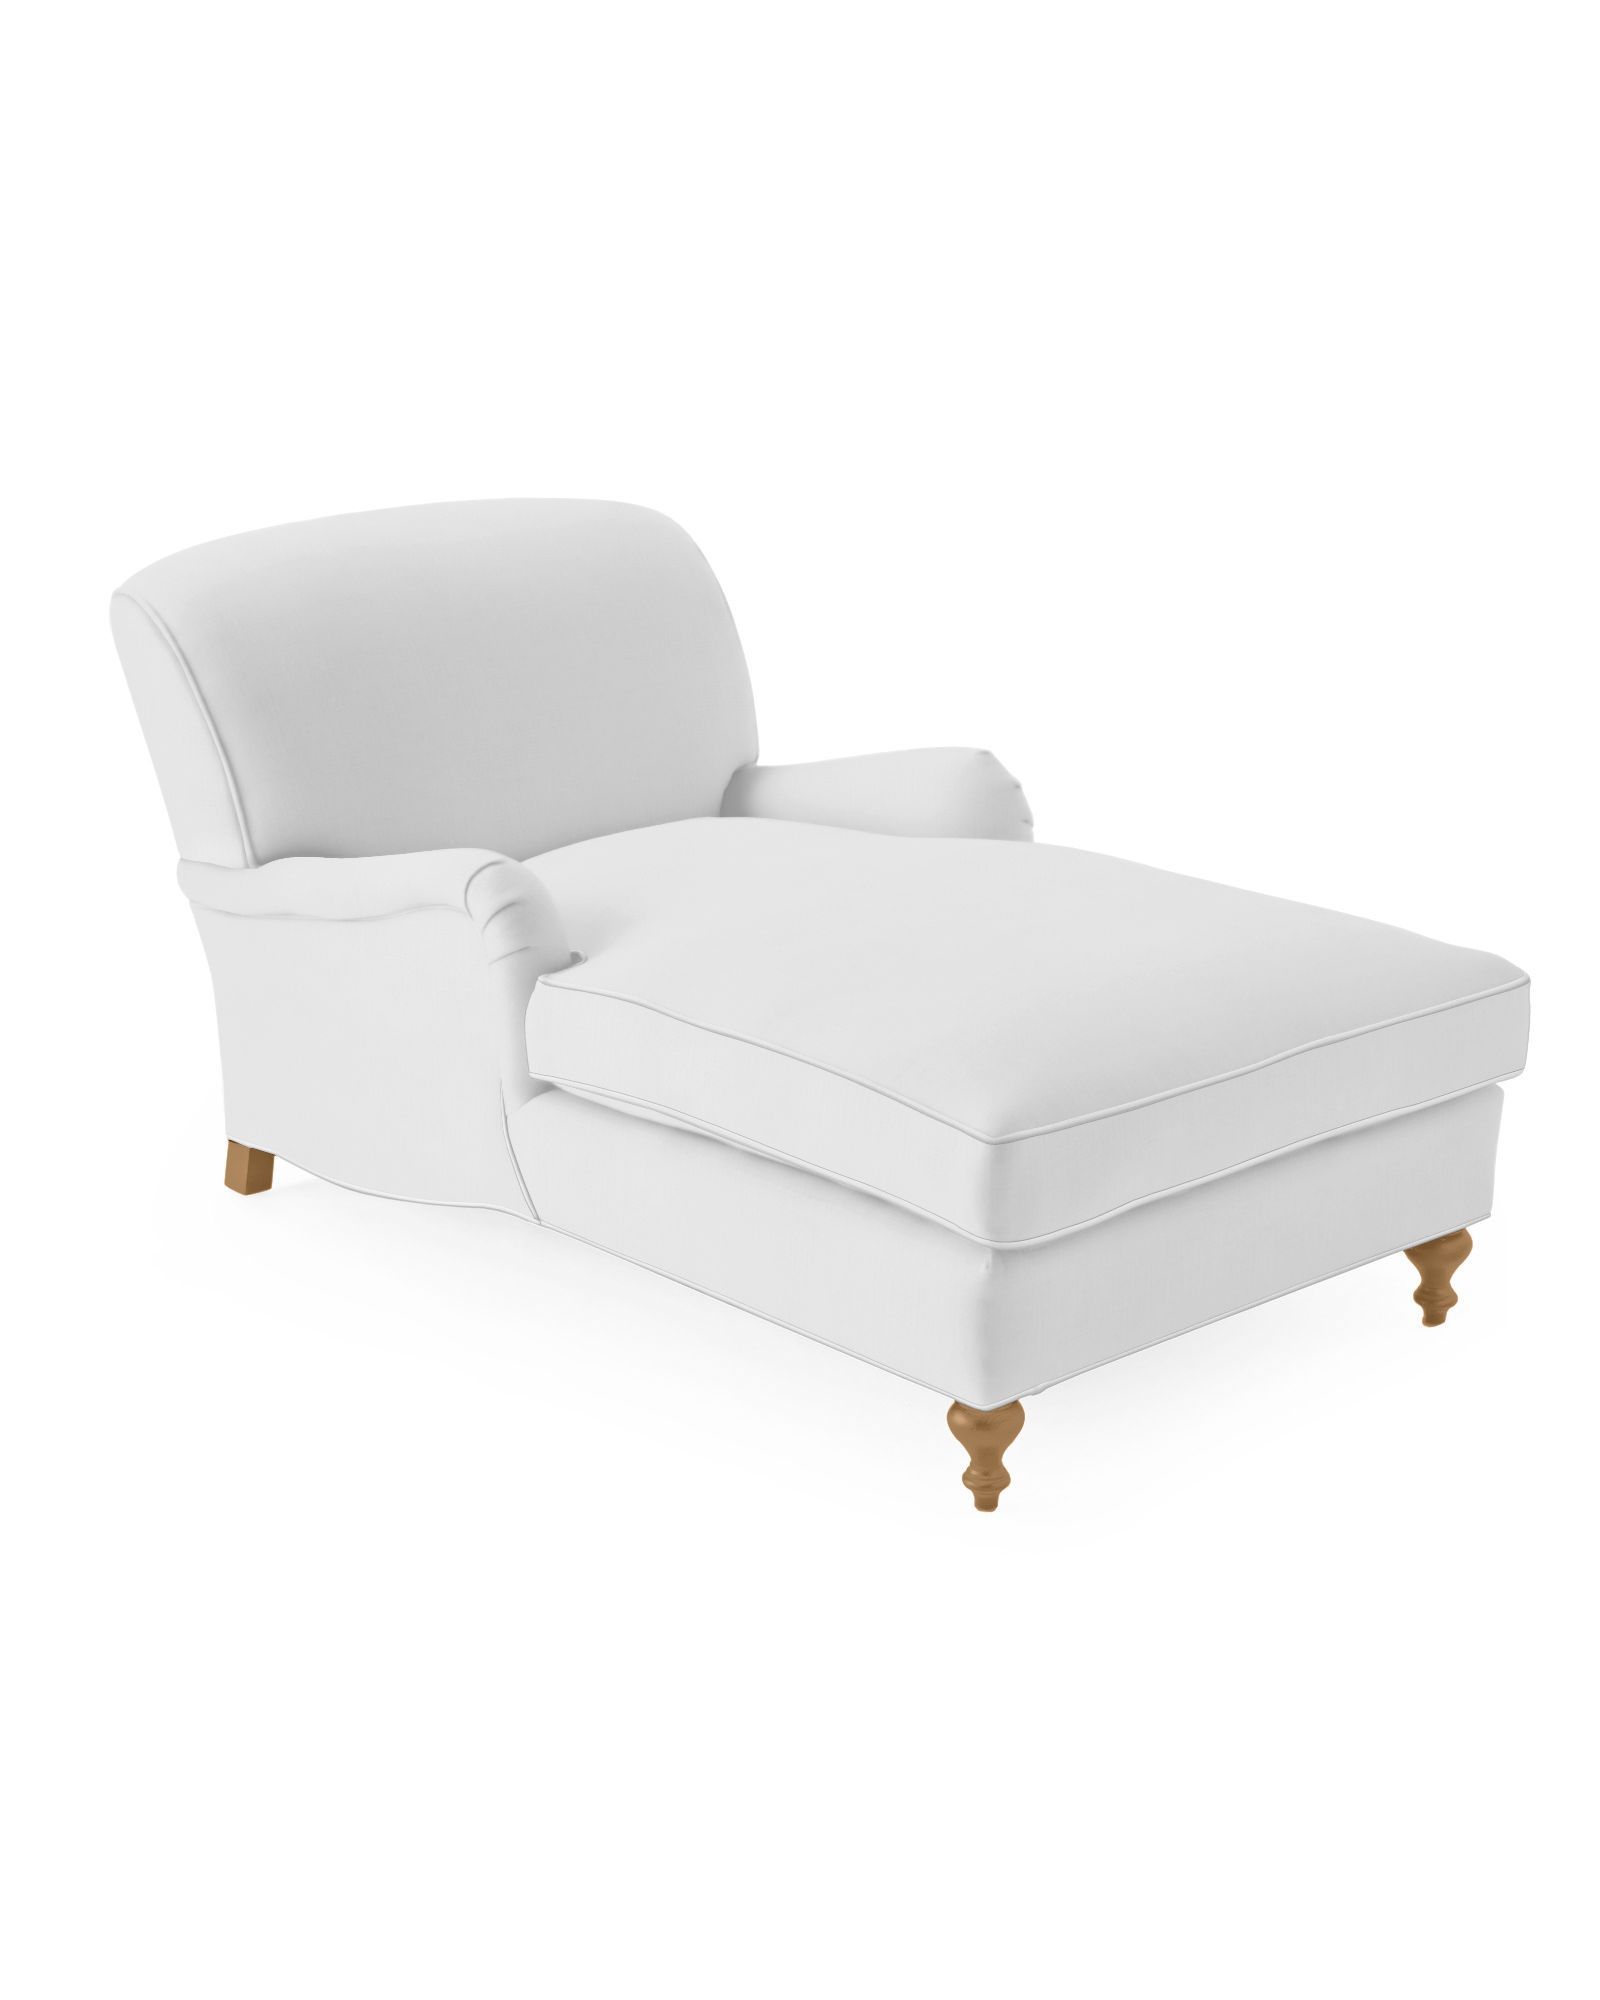 Miramar Chaise | Serena and Lily